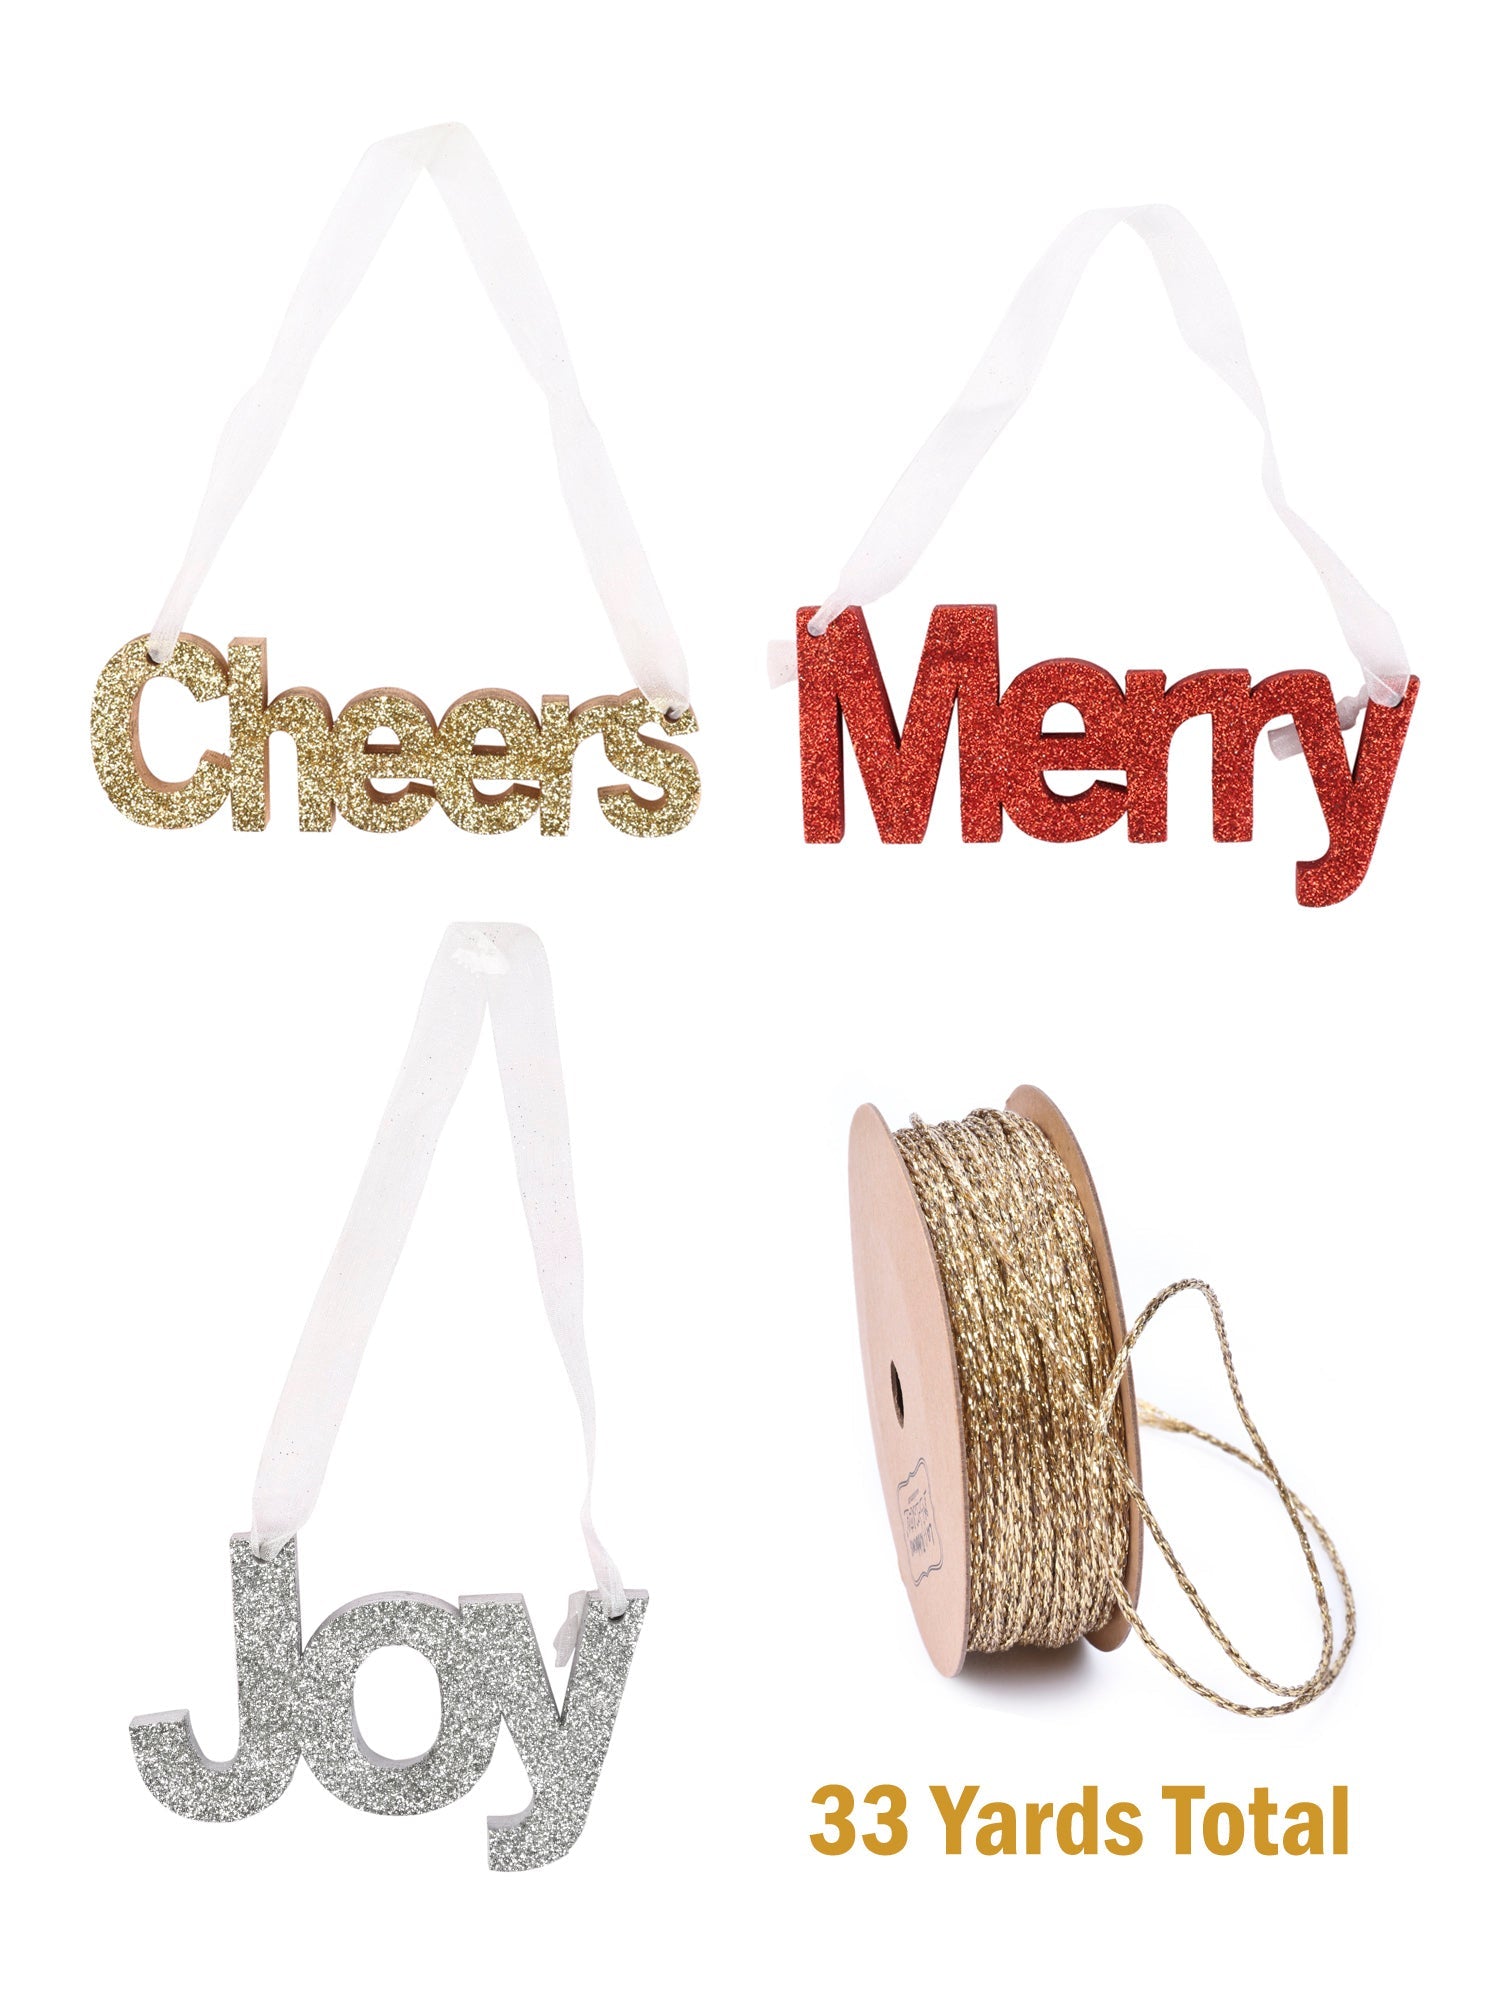 Wooden "Merry" "Joy" "Cheers" Sign Door Wall Hanging Christmas Ornament for Holidays Decoration